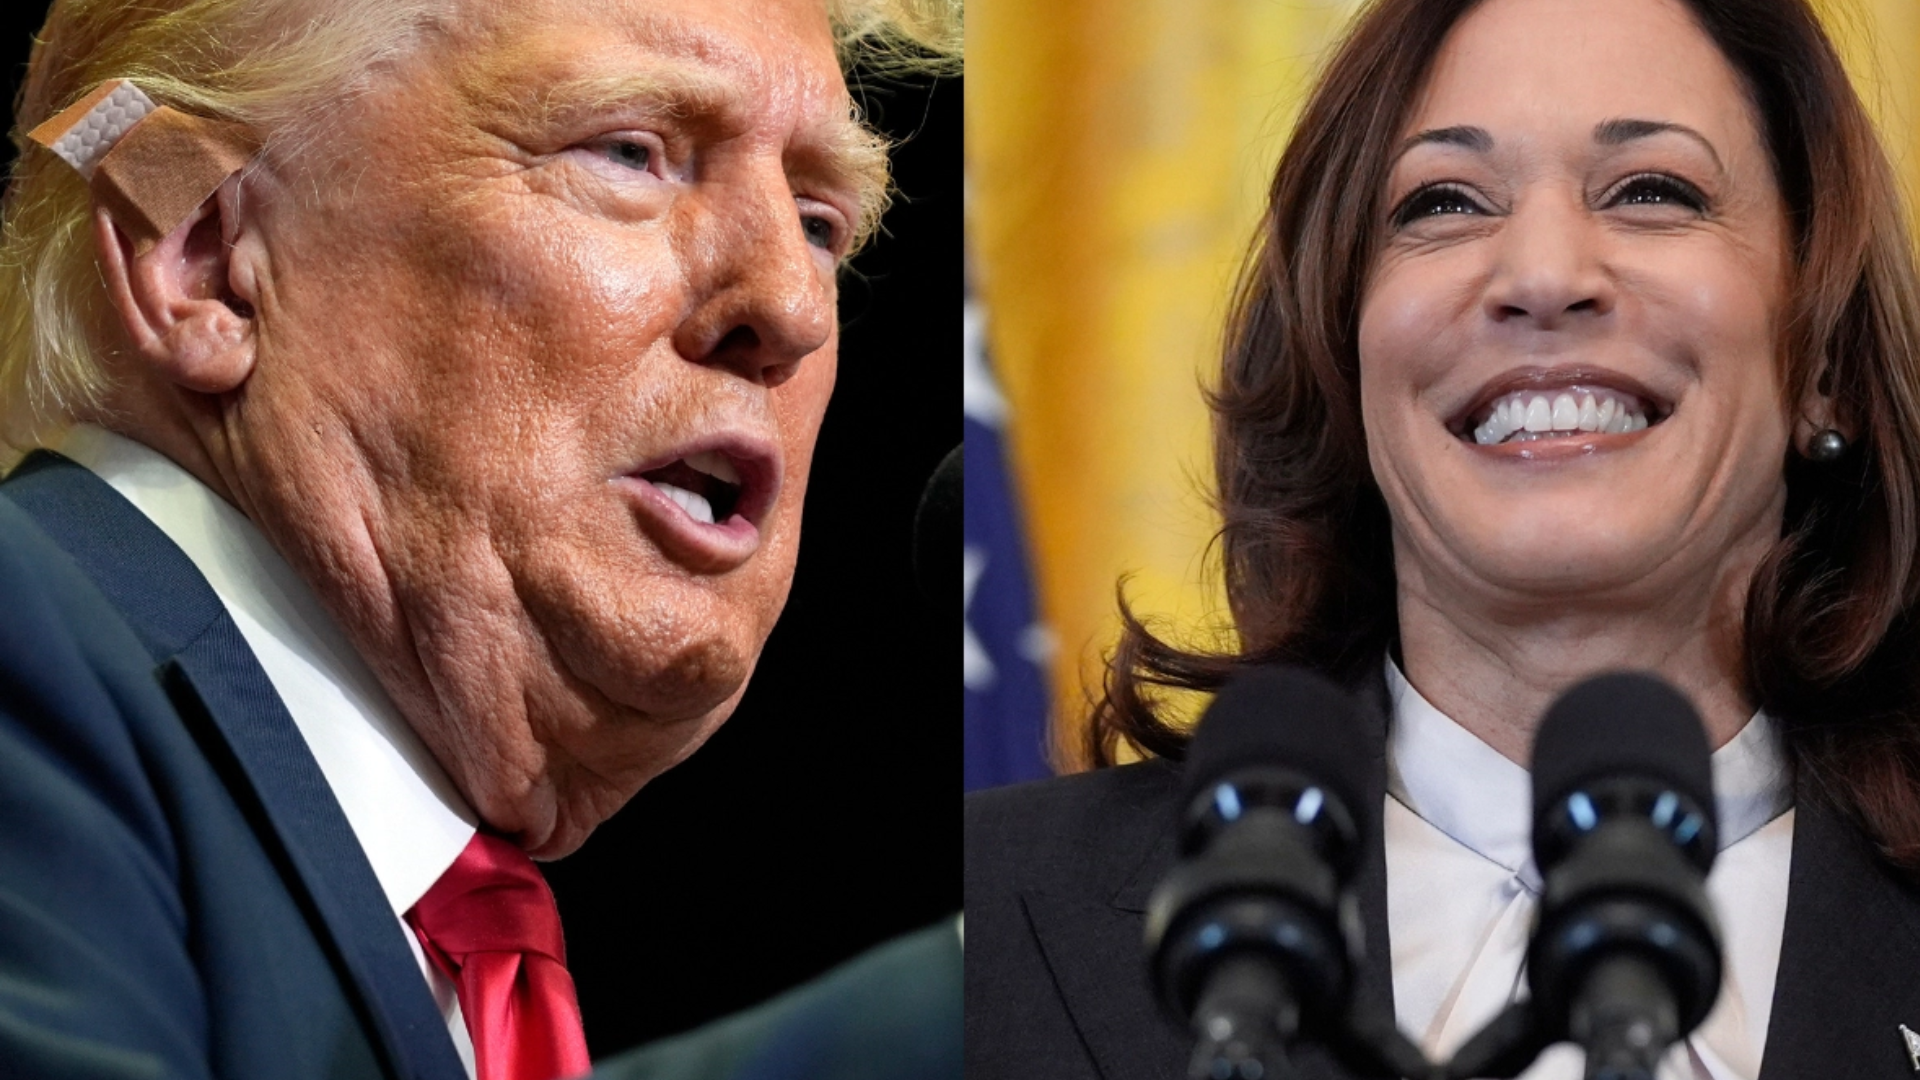 How Kamala Harris Could Reshape Donald Trump’s Campaign If Nominated, An Analysis